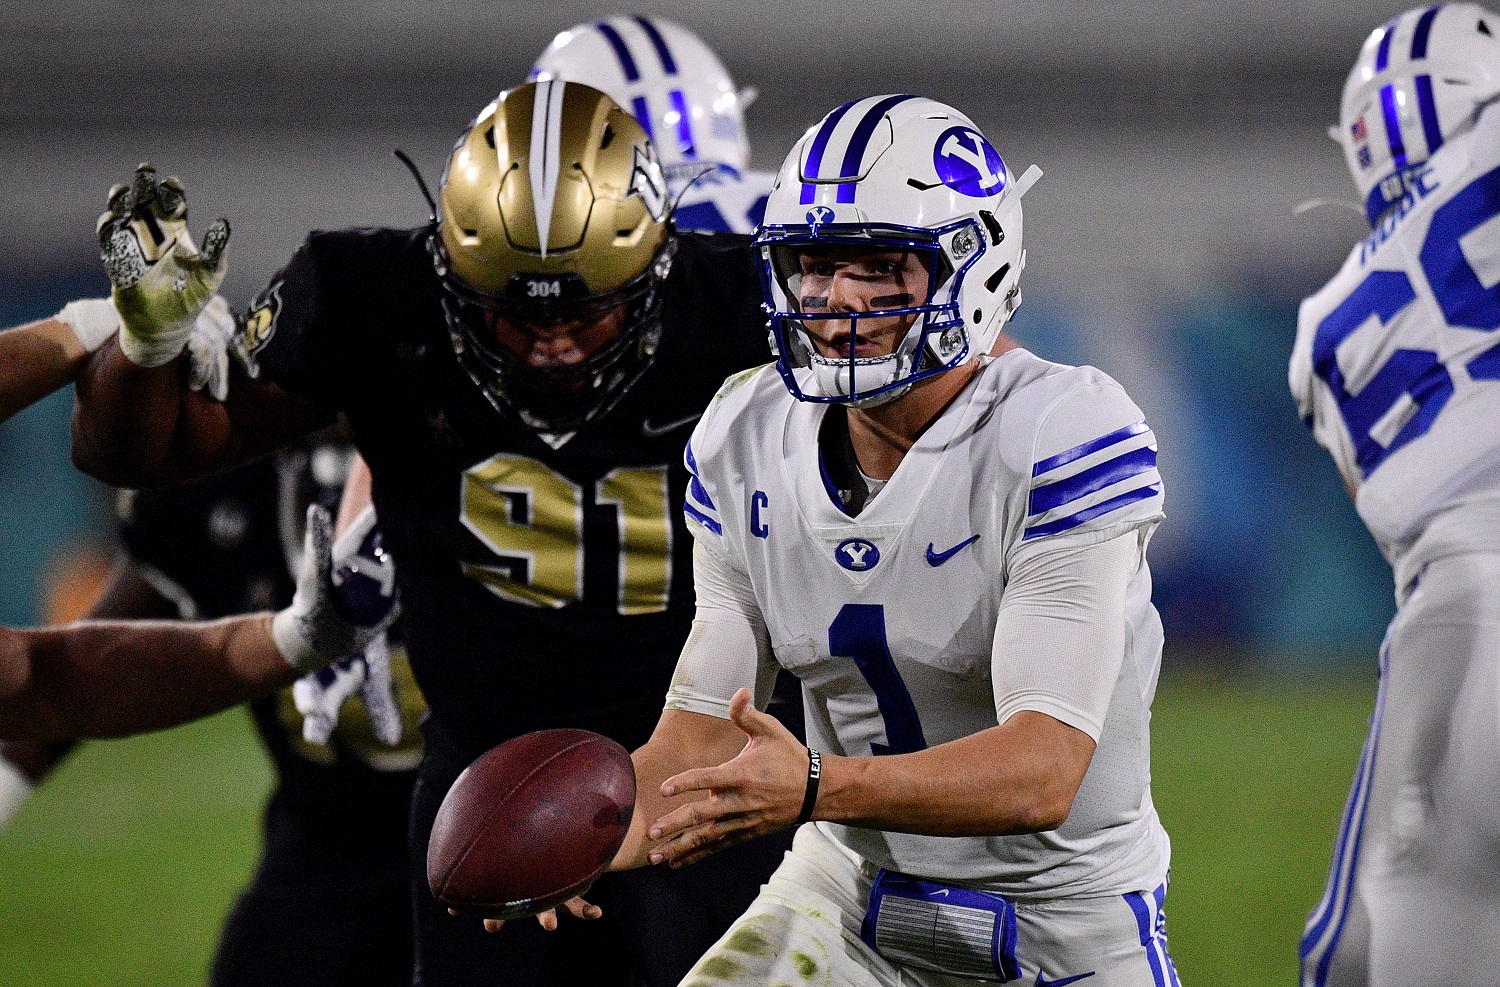 Zach Wilson of the BYU Cougars in action against Central Florida on Dec. 22, 2020.